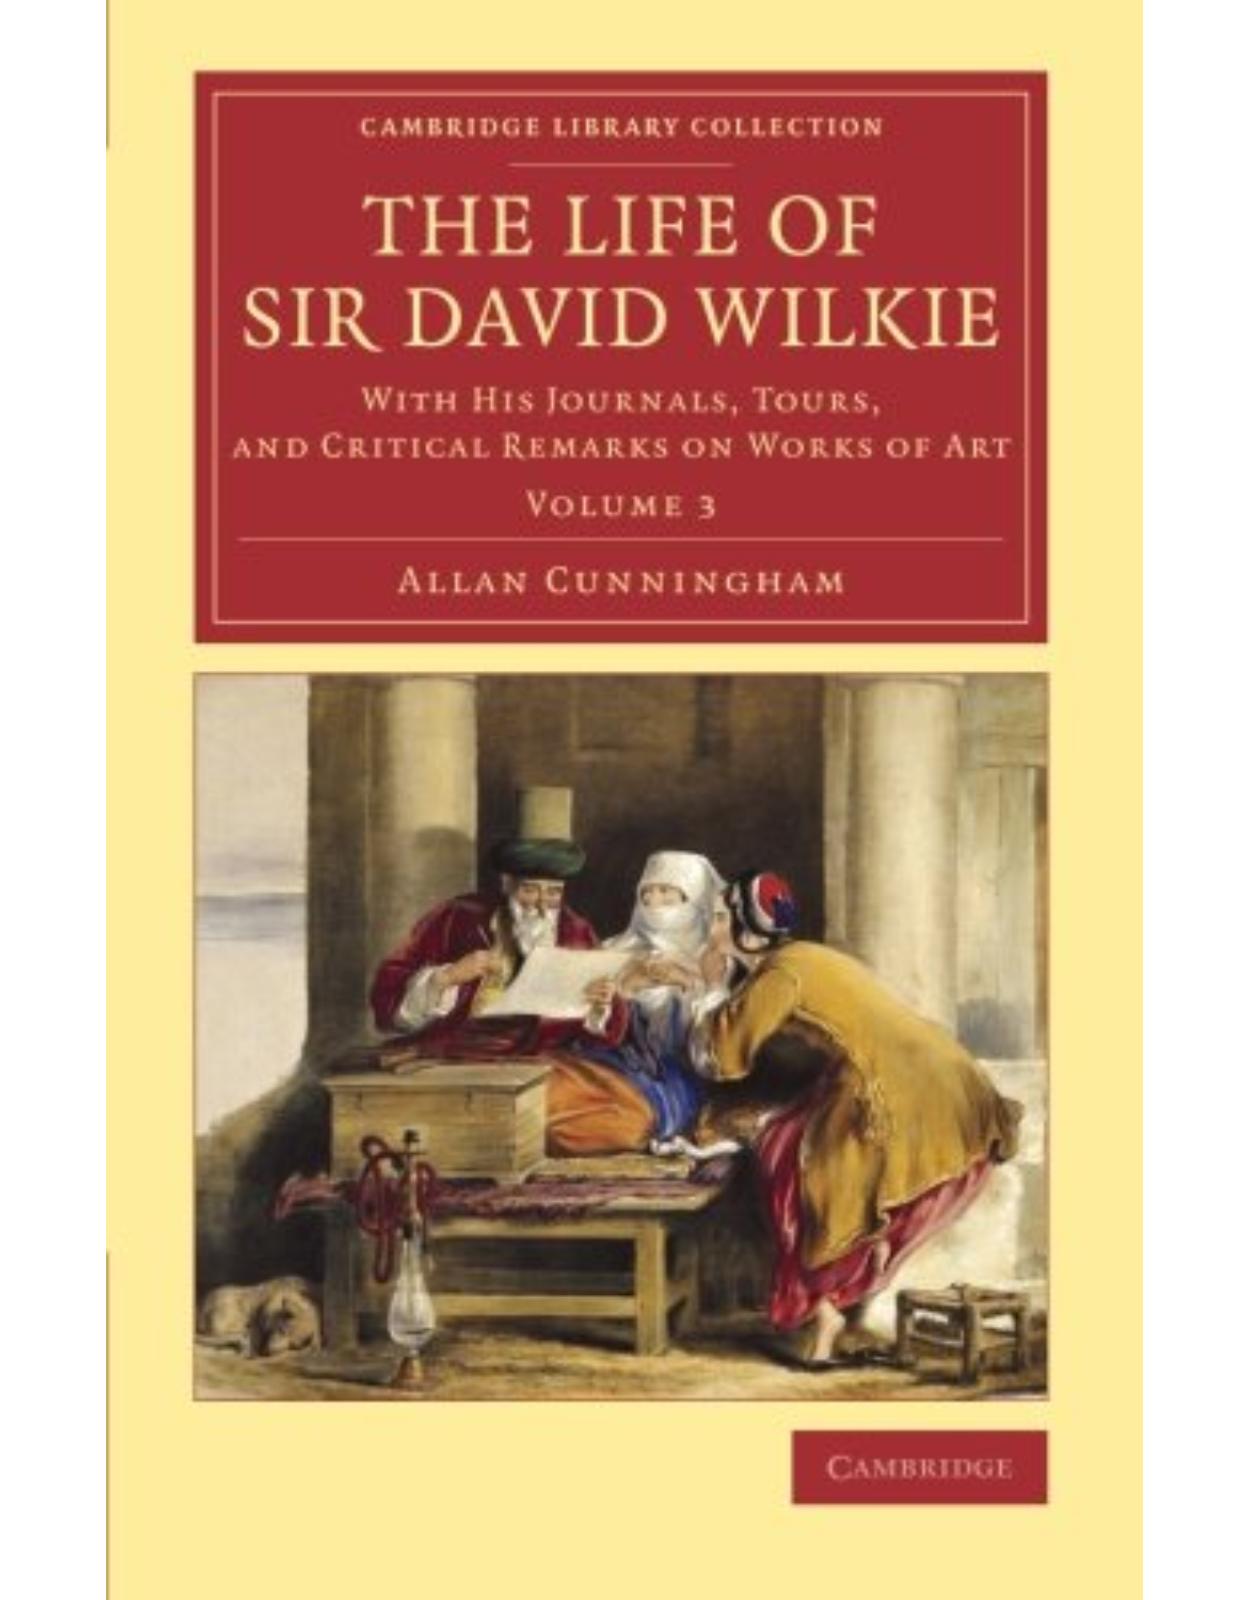 The Life of Sir David Wilkie 3 Volume Set: The Life of Sir David Wilkie: With his Journals, Tours, and Critical Remarks on Works of Art: Volume 3 (Cambridge Library Collection - Art and Architecture)